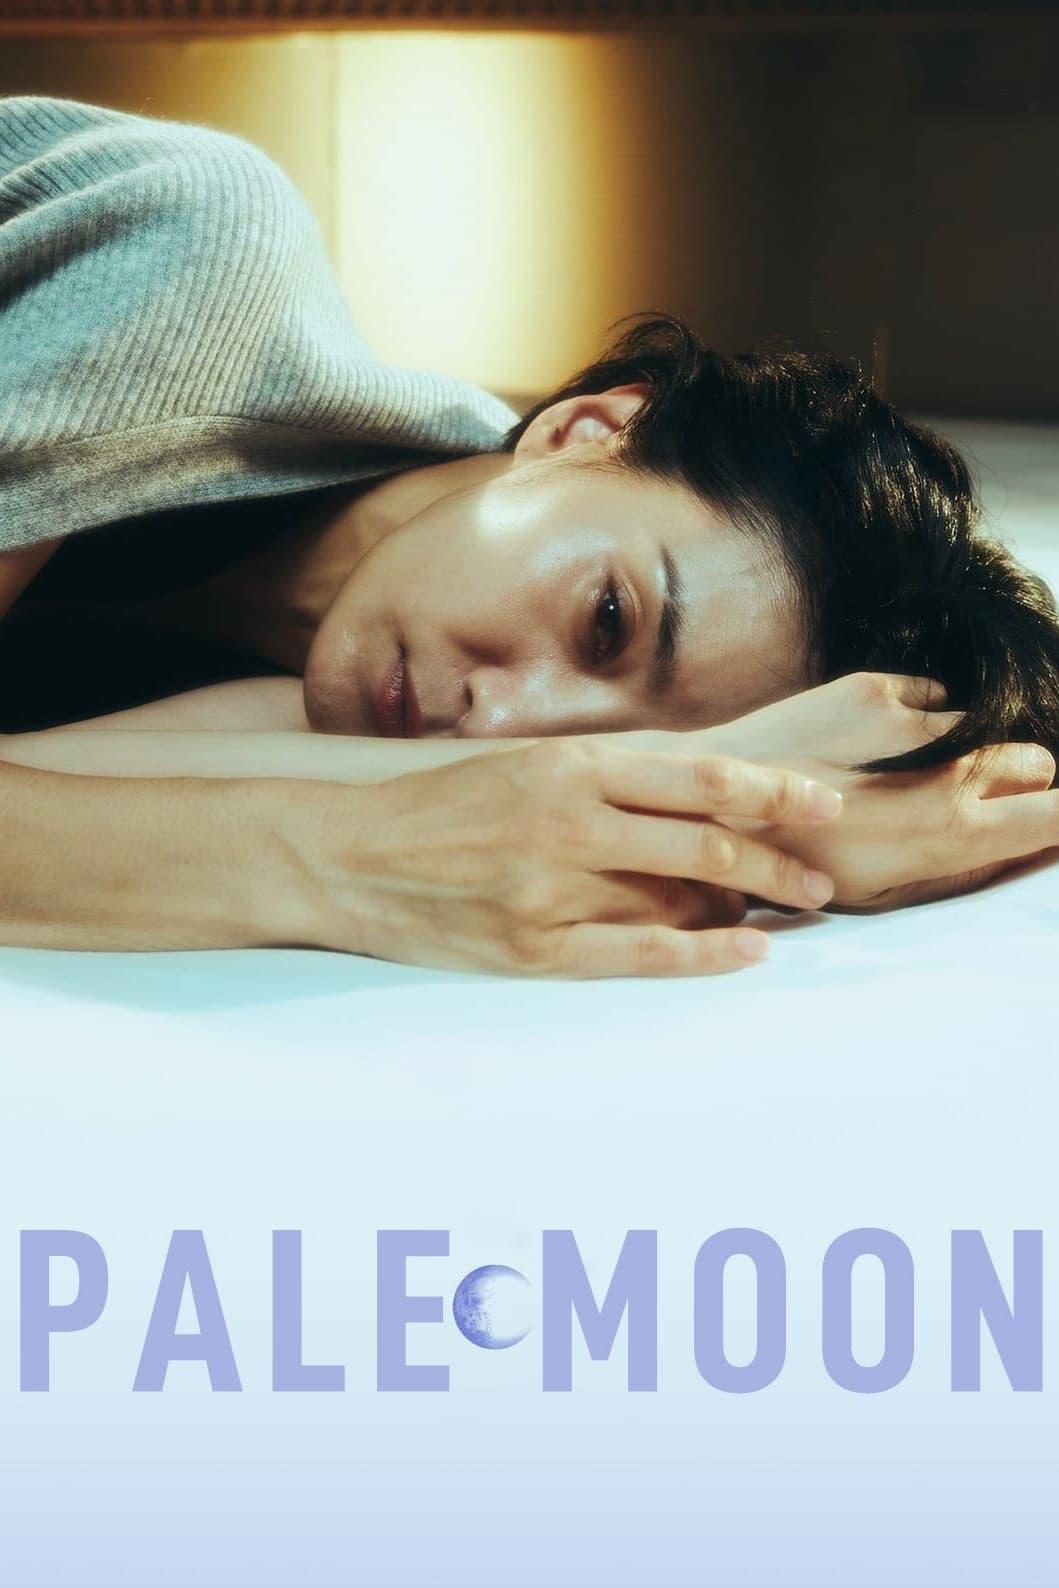 Pale Moon poster